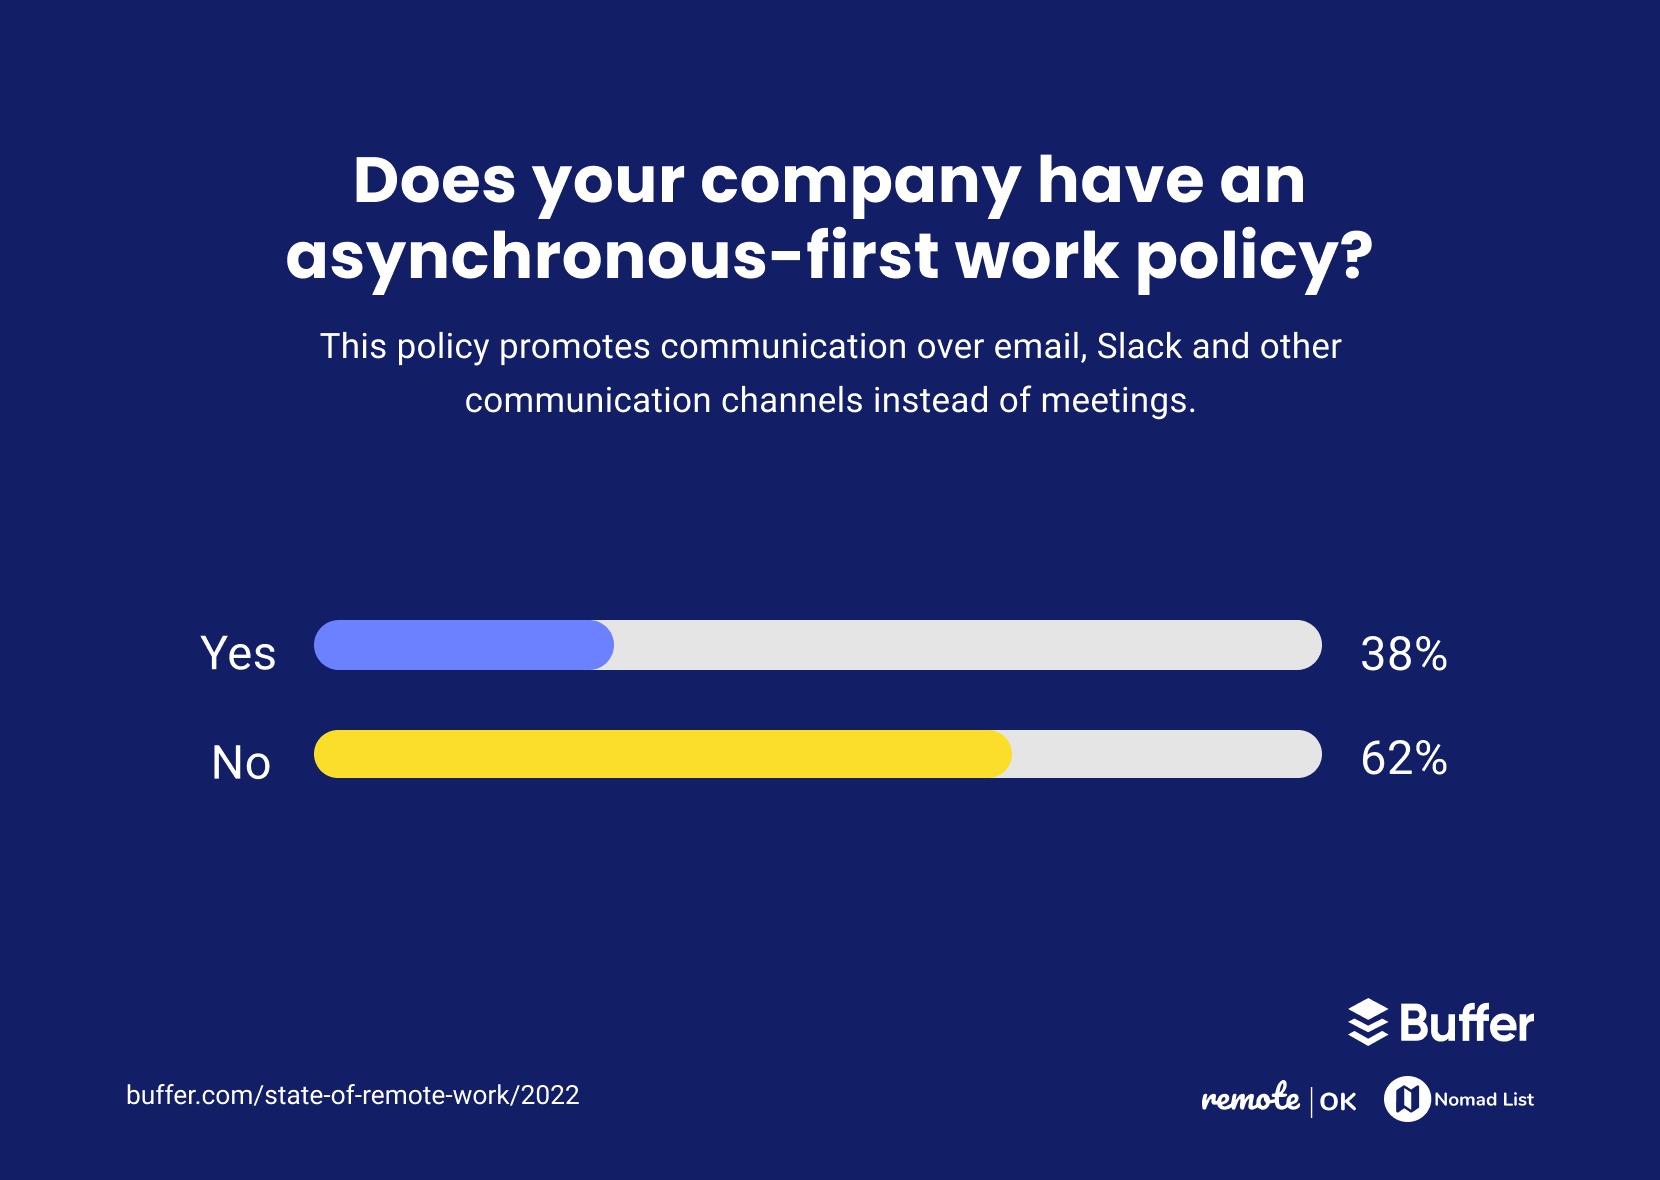 Does your company have an asynchronous-first work policy? This policy promotes communication over email, Slack and other communication channels instead of meetings.